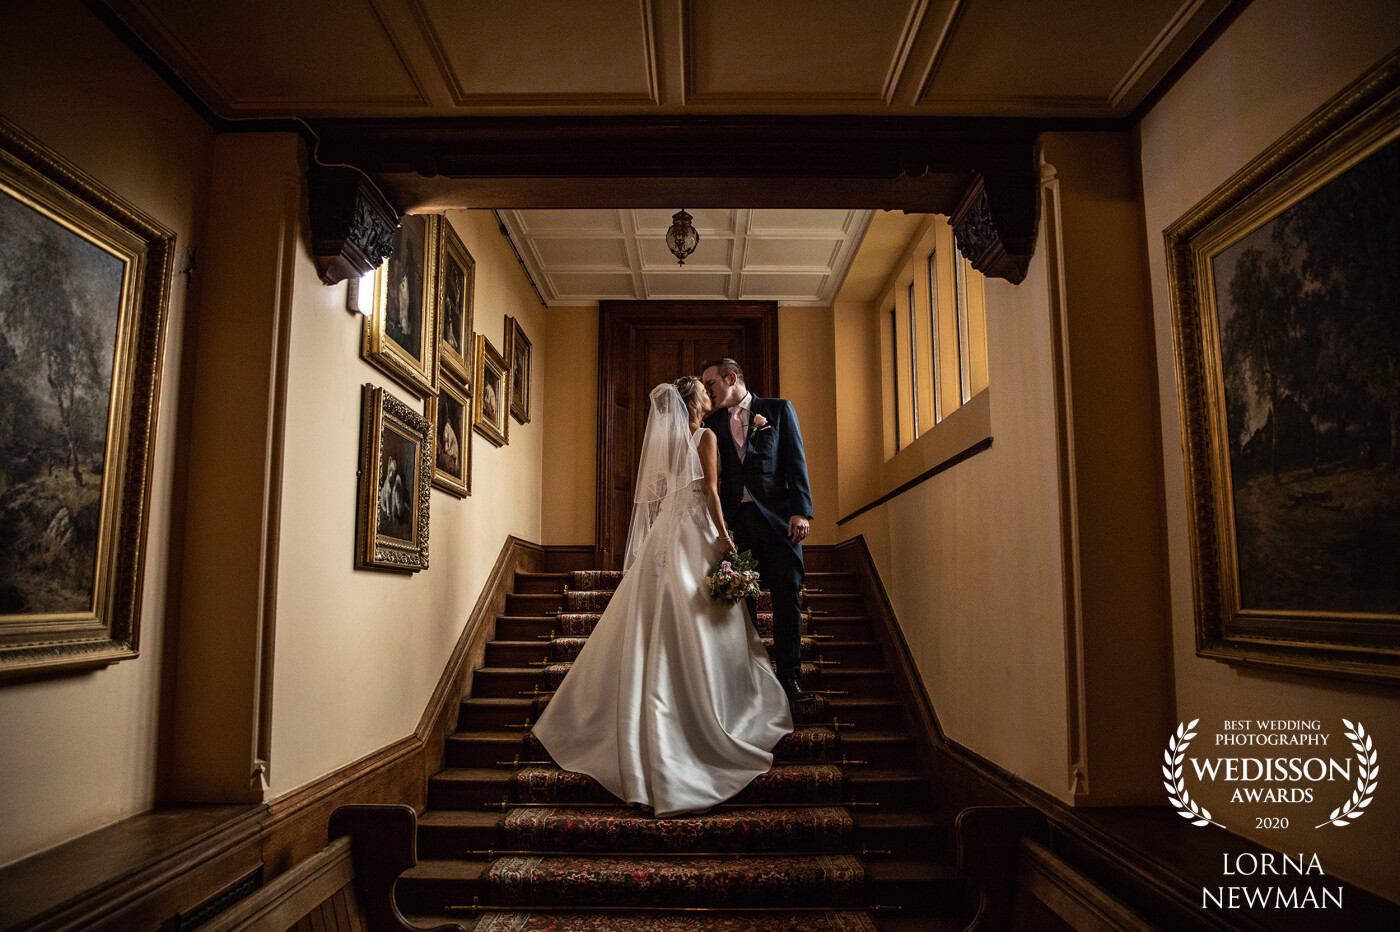 Lovely Tracey & Ben got married last month at The House at Shuttleworth, it was a very wet & windy day so we took a moment after they got married to explore the beautiful house where I captured this lovely moment of them together.